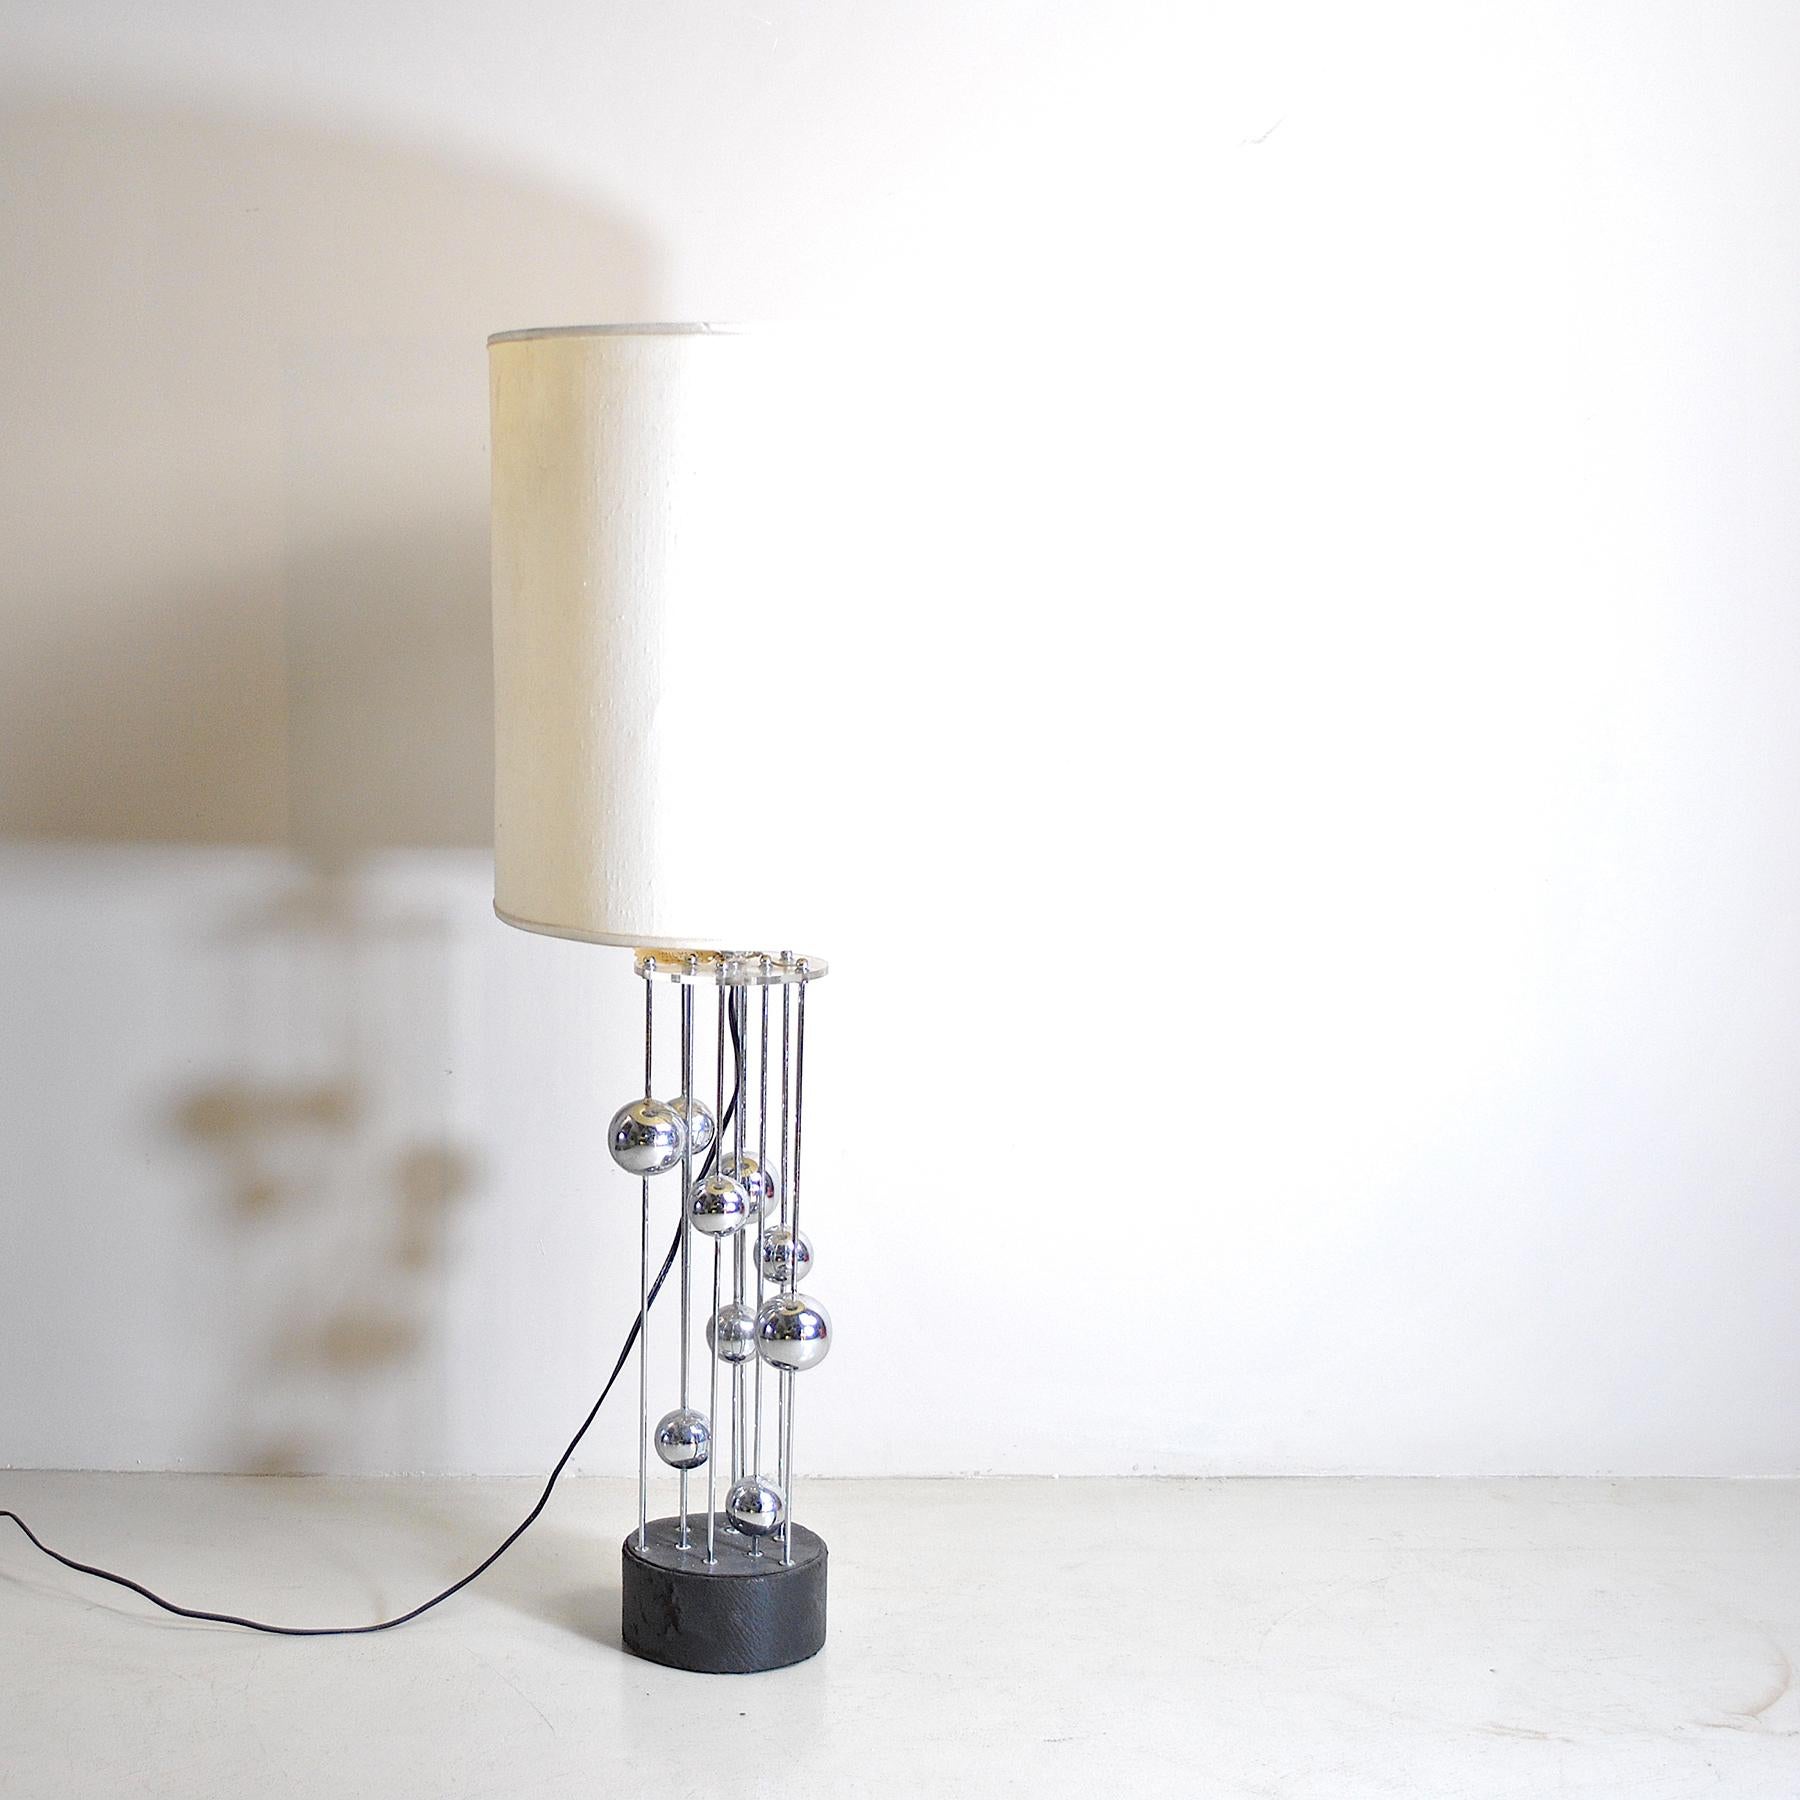 Atom design table lamp from the 1970s in stainless steel.

The lamp is sold without the lampshade in the picture, but it can be requested in the form, sizes and colors at will with an extra price.

n.b. the measures in the description are